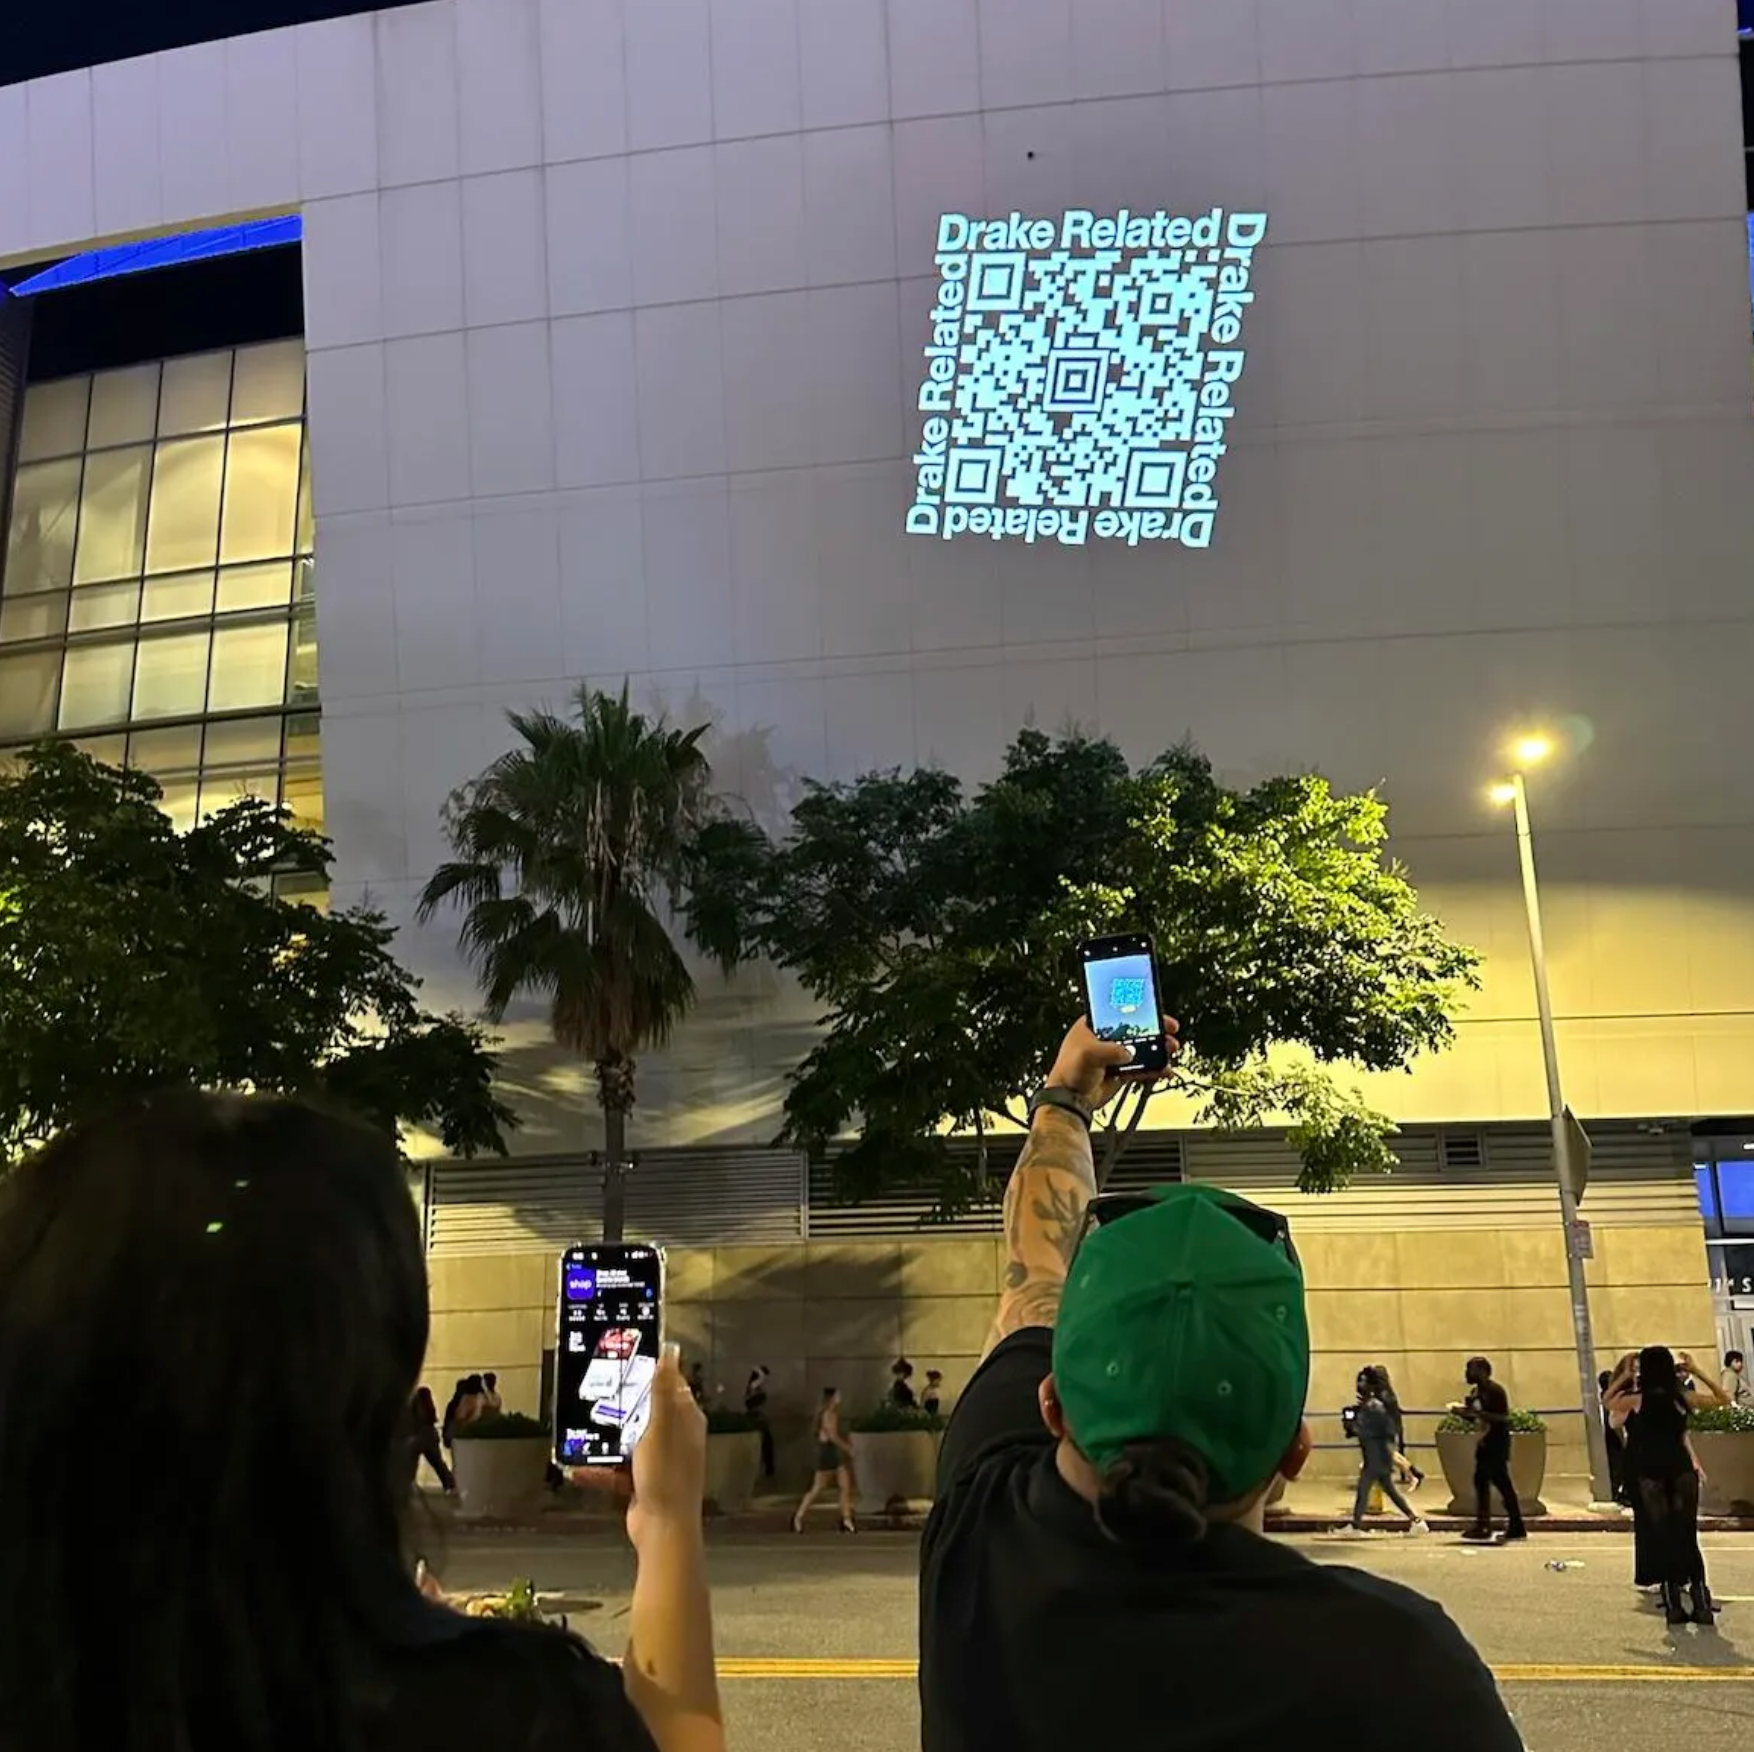 Image of Drake using guerrilla marketing techniques to promote a giveaway to fans after a concert.